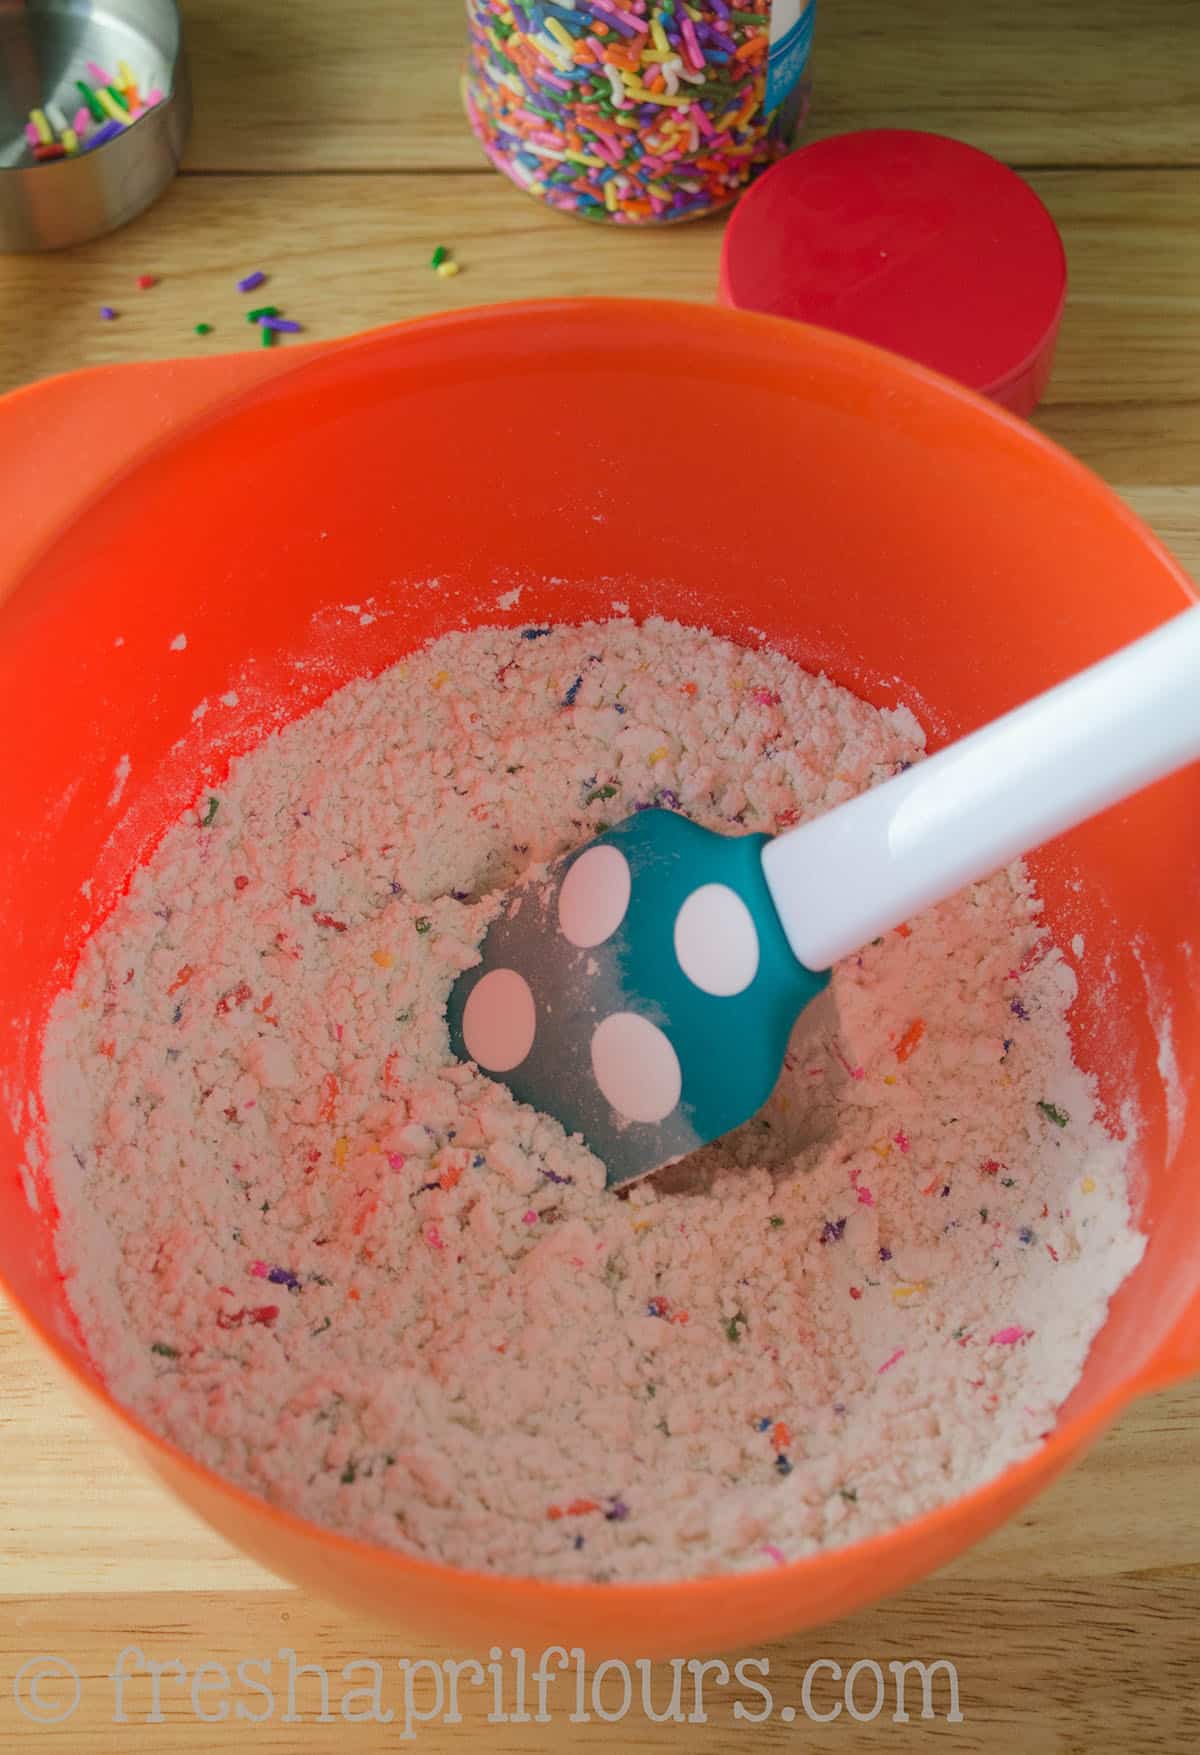 The dry ingredients for funfetti biscotti in a bowl.